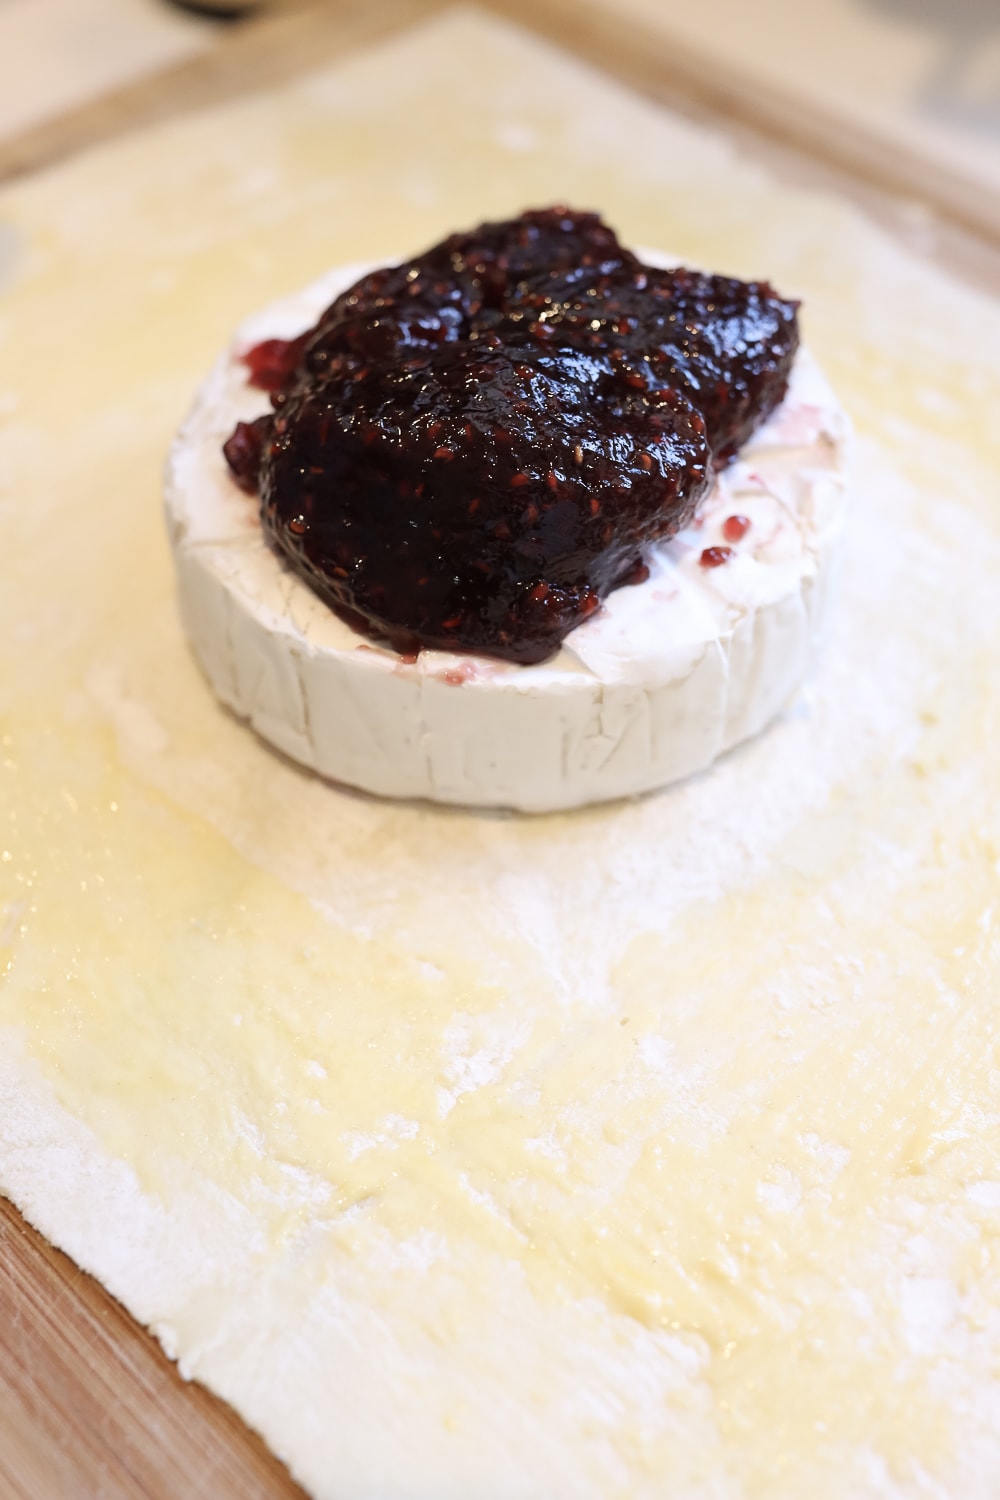 Blogger Stephanie Ziajka shows how to make baked brie with preserves on Diary of a Debutante